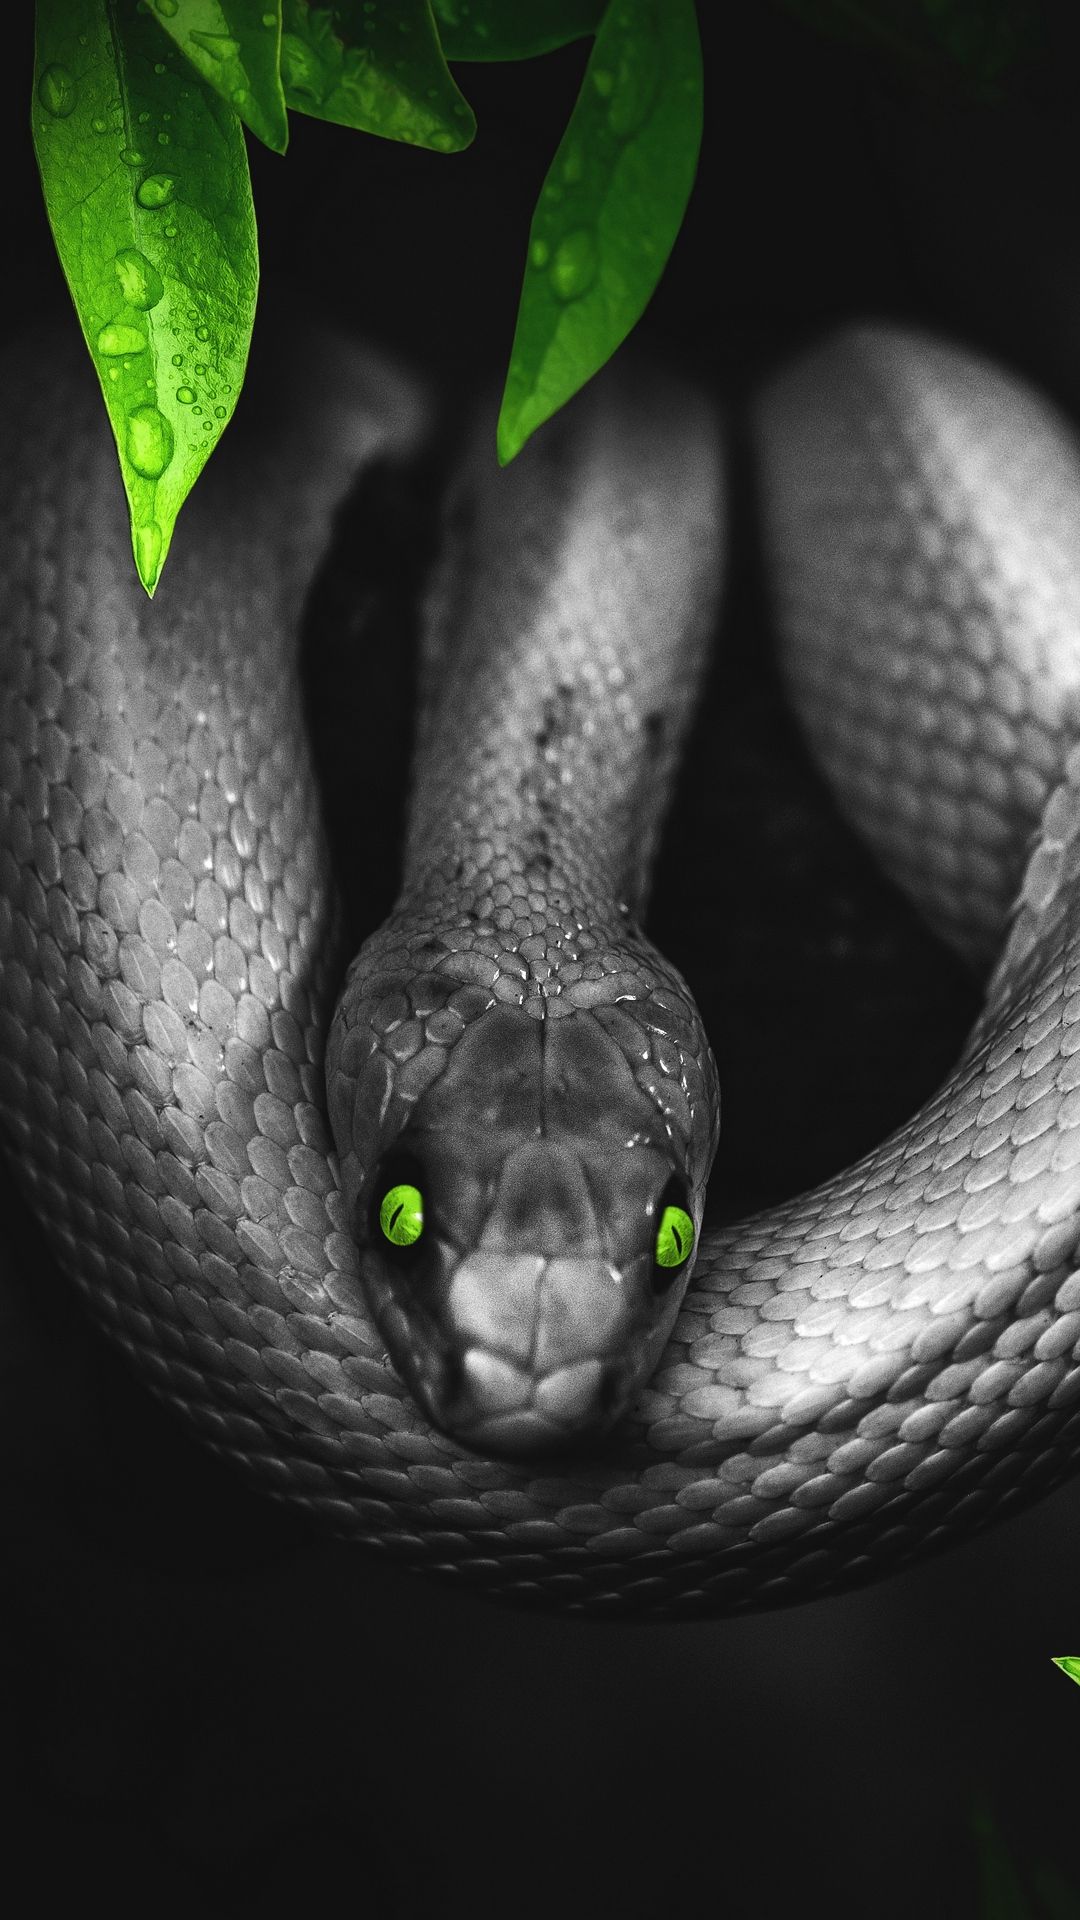 A snake with green eyes is sitting on leaves - Snake